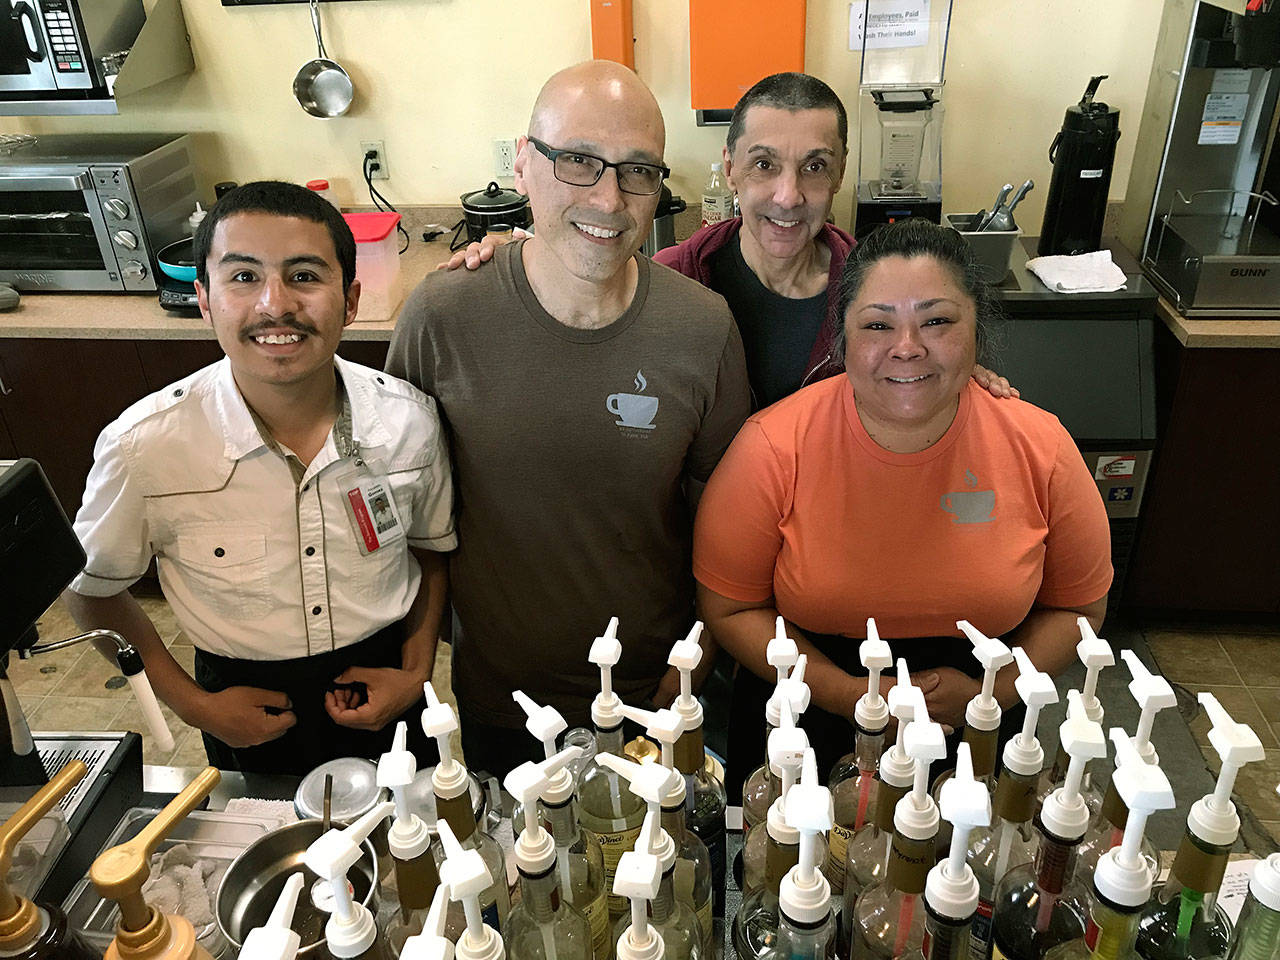 On staff at Café on Fourth are, from left, Abraham Gomez, owner Sheldon Smith, Jared Estrella and Jessica Higa. MARK KLAAS, Kent Reporter